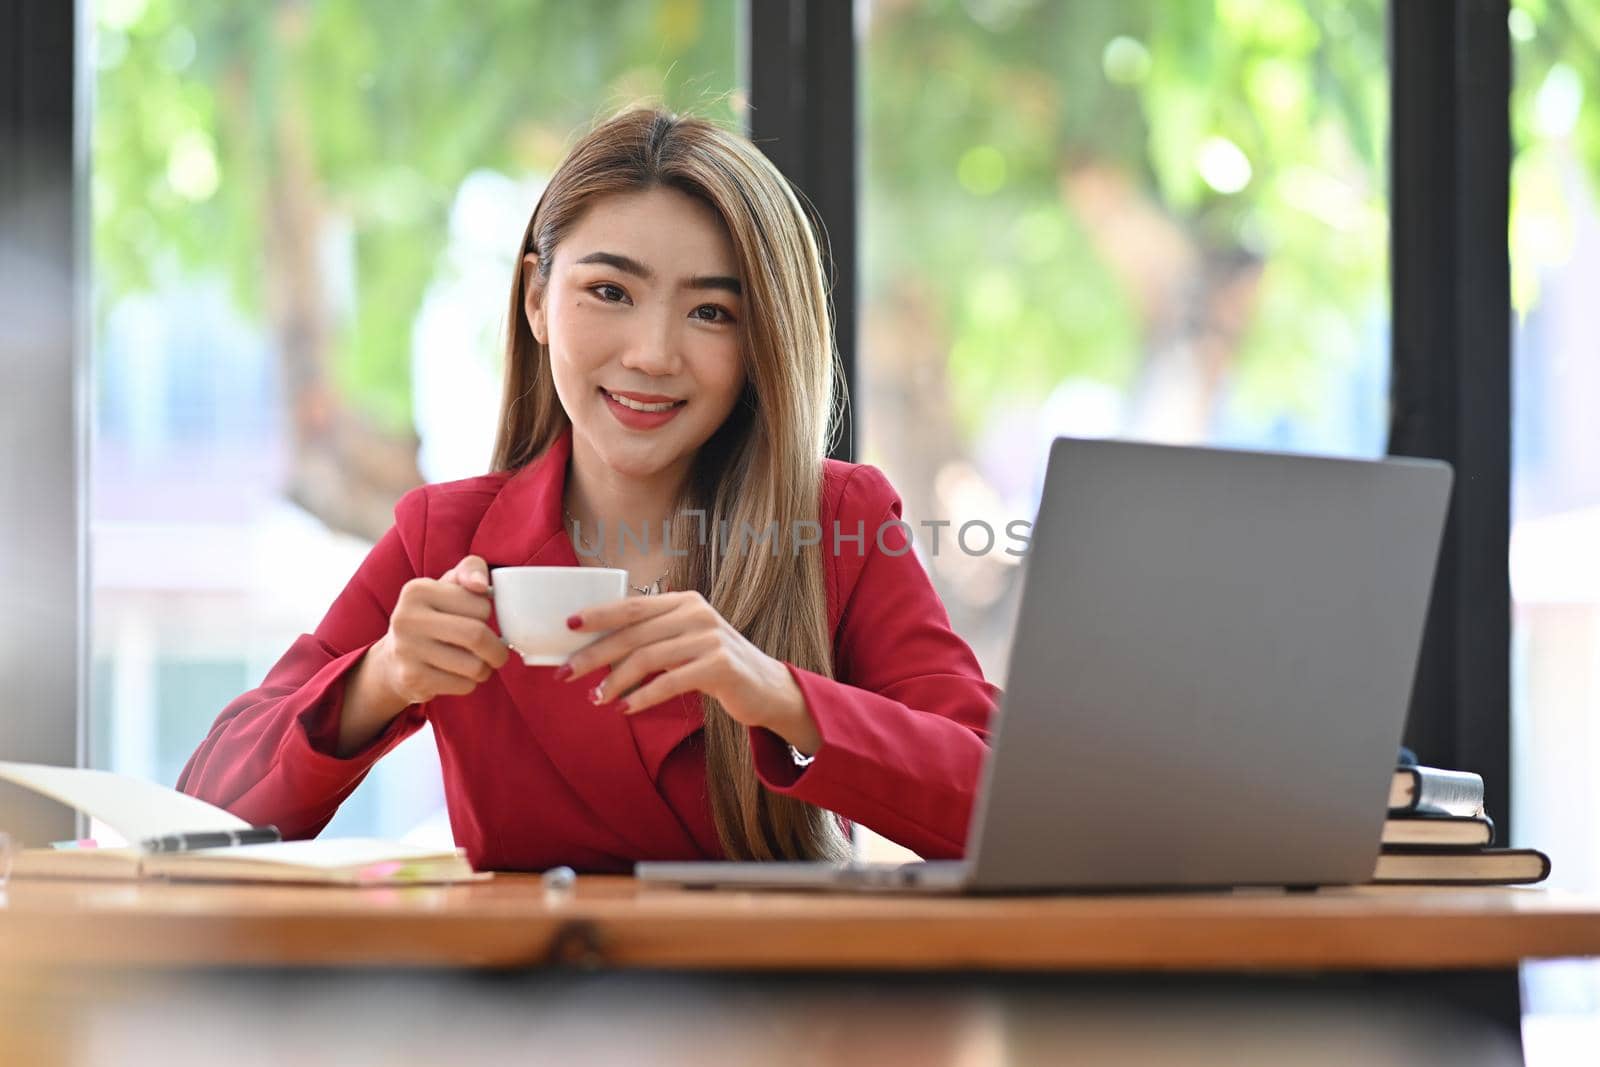 Beautiful businesswoman sitting in front of computer laptop and drinking coffee in the morning. by prathanchorruangsak